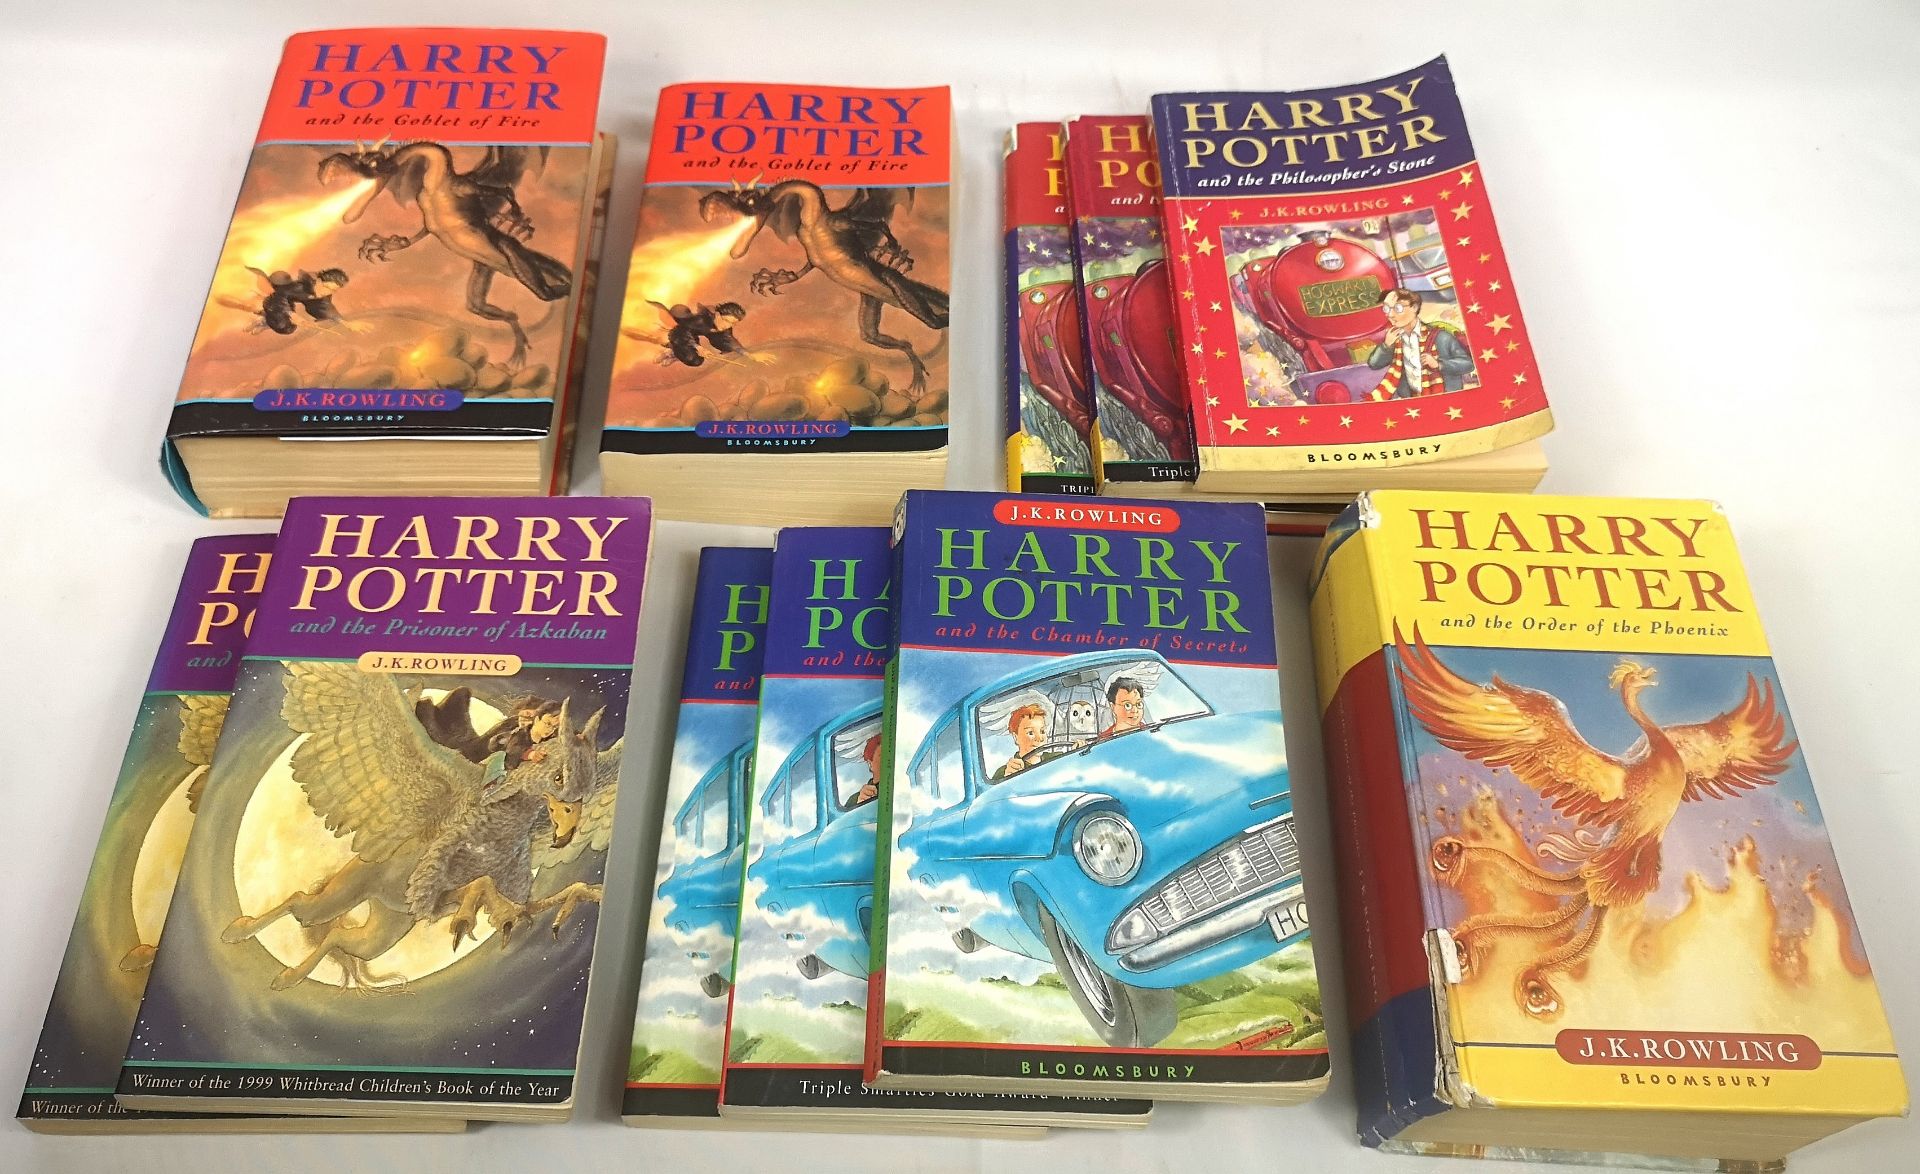 Two hardback Harry Potter books together with nine paperback Harry Potter books